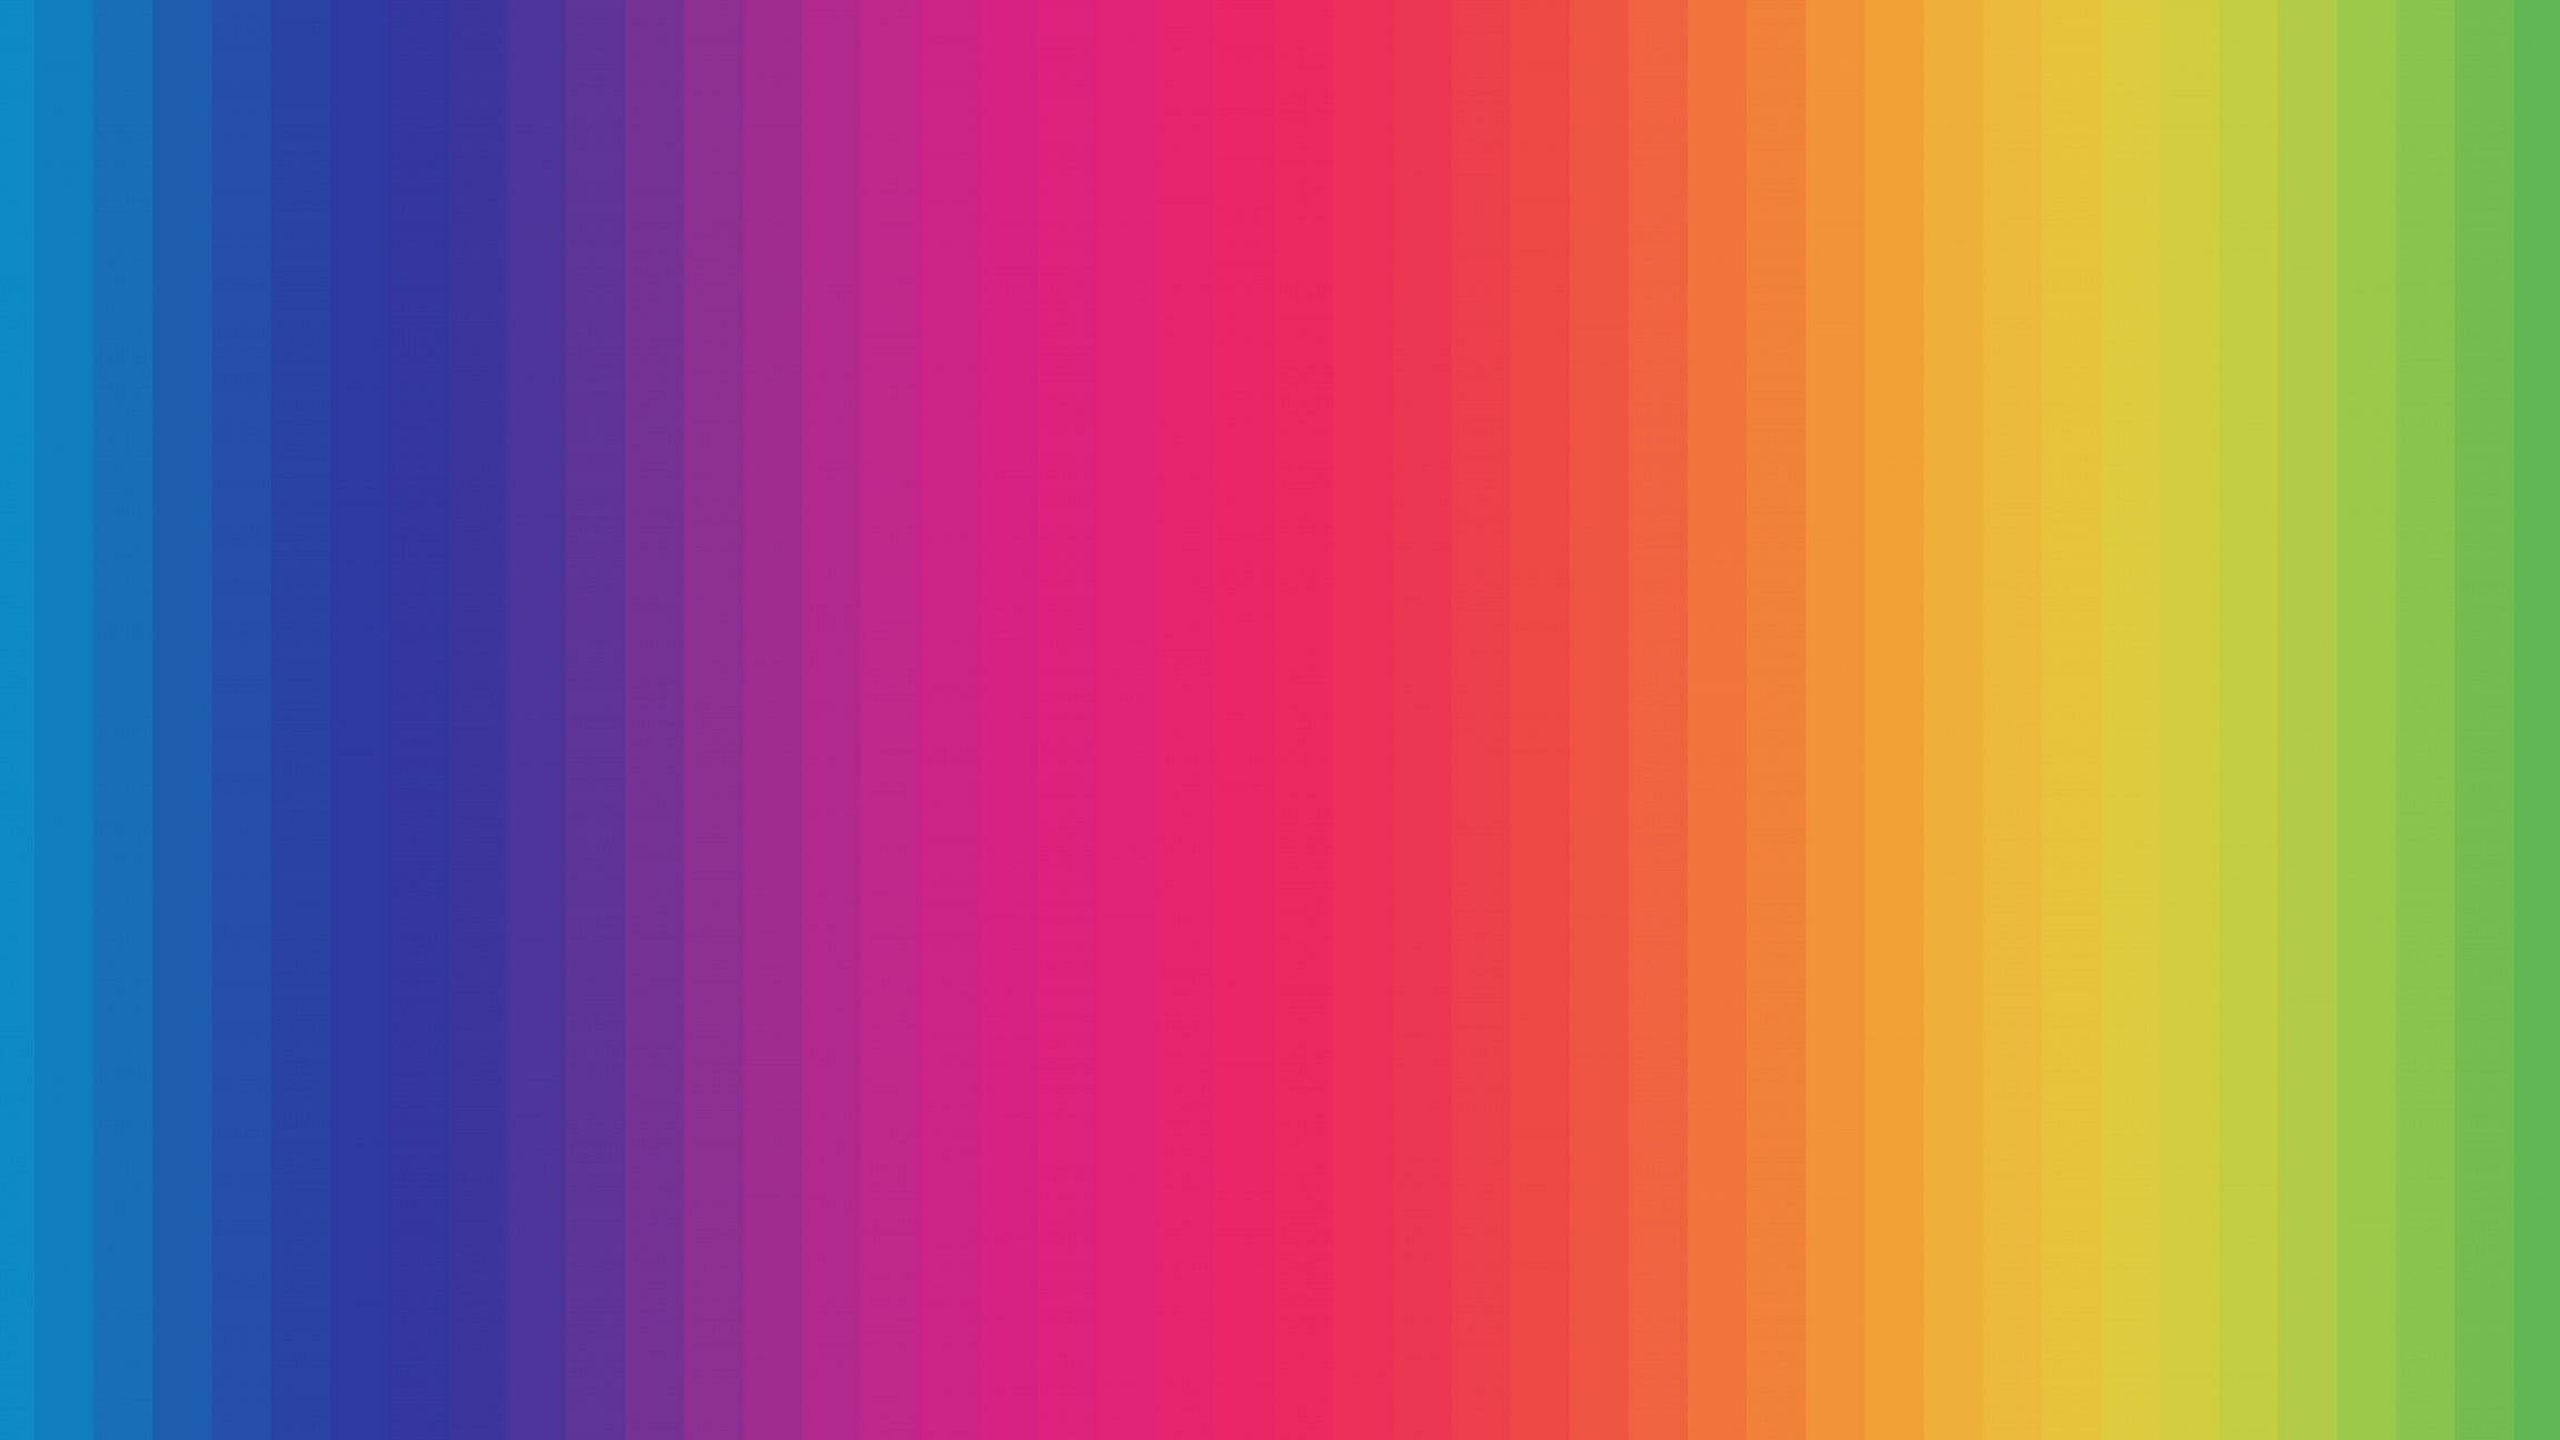 Rainbow Colors: Gradient, Parallel lines, Polygonal art, Different shades. 2560x1440 HD Wallpaper.